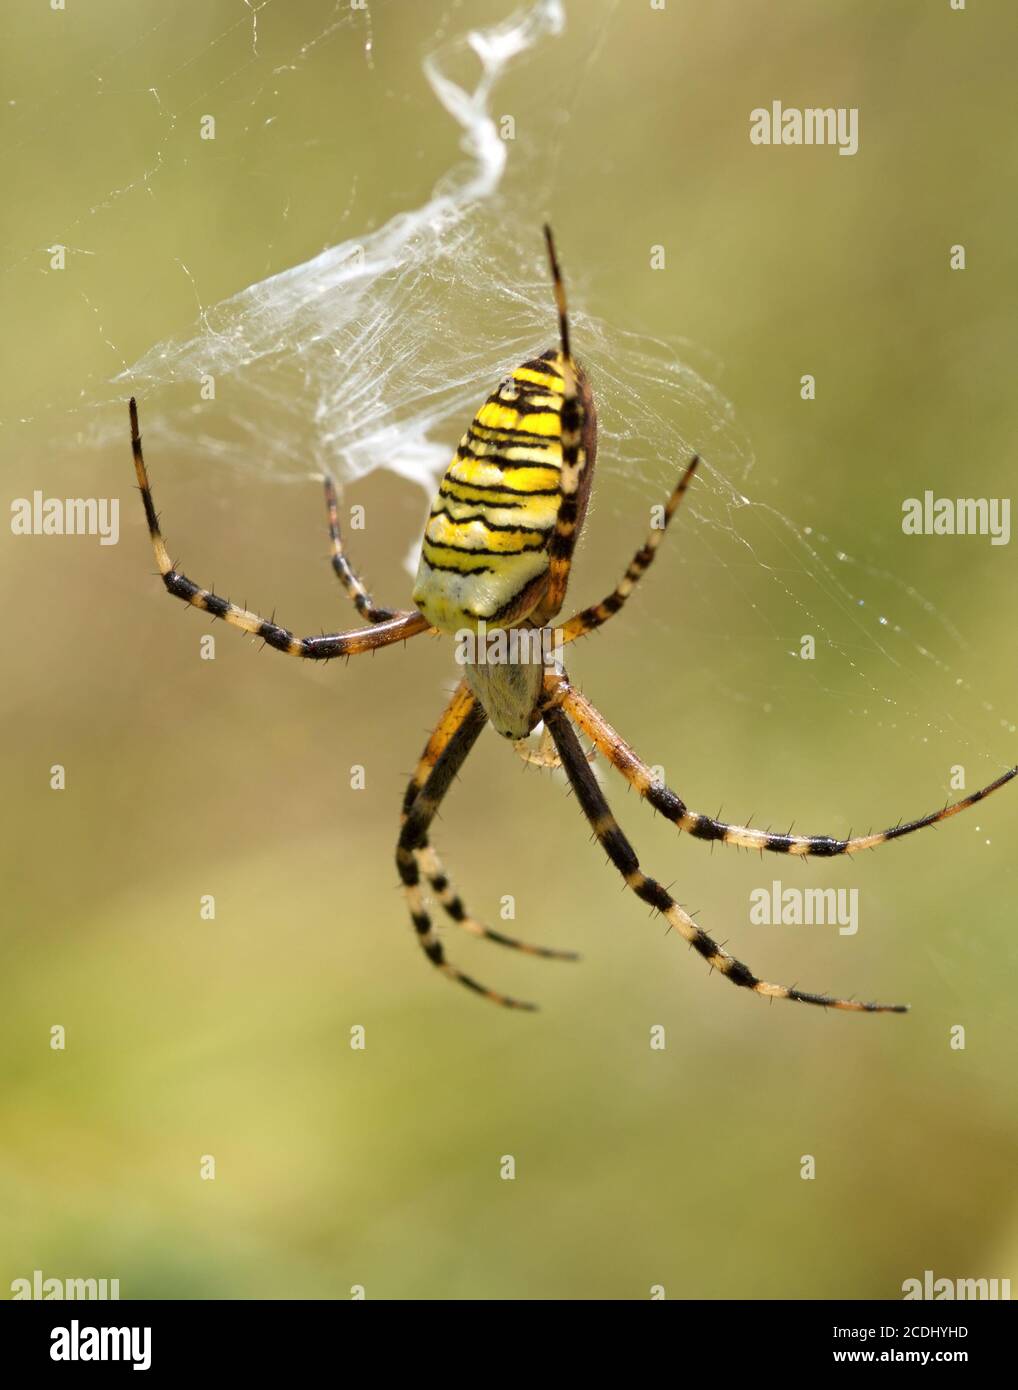 Striped yellow spider on a web Stock Photo